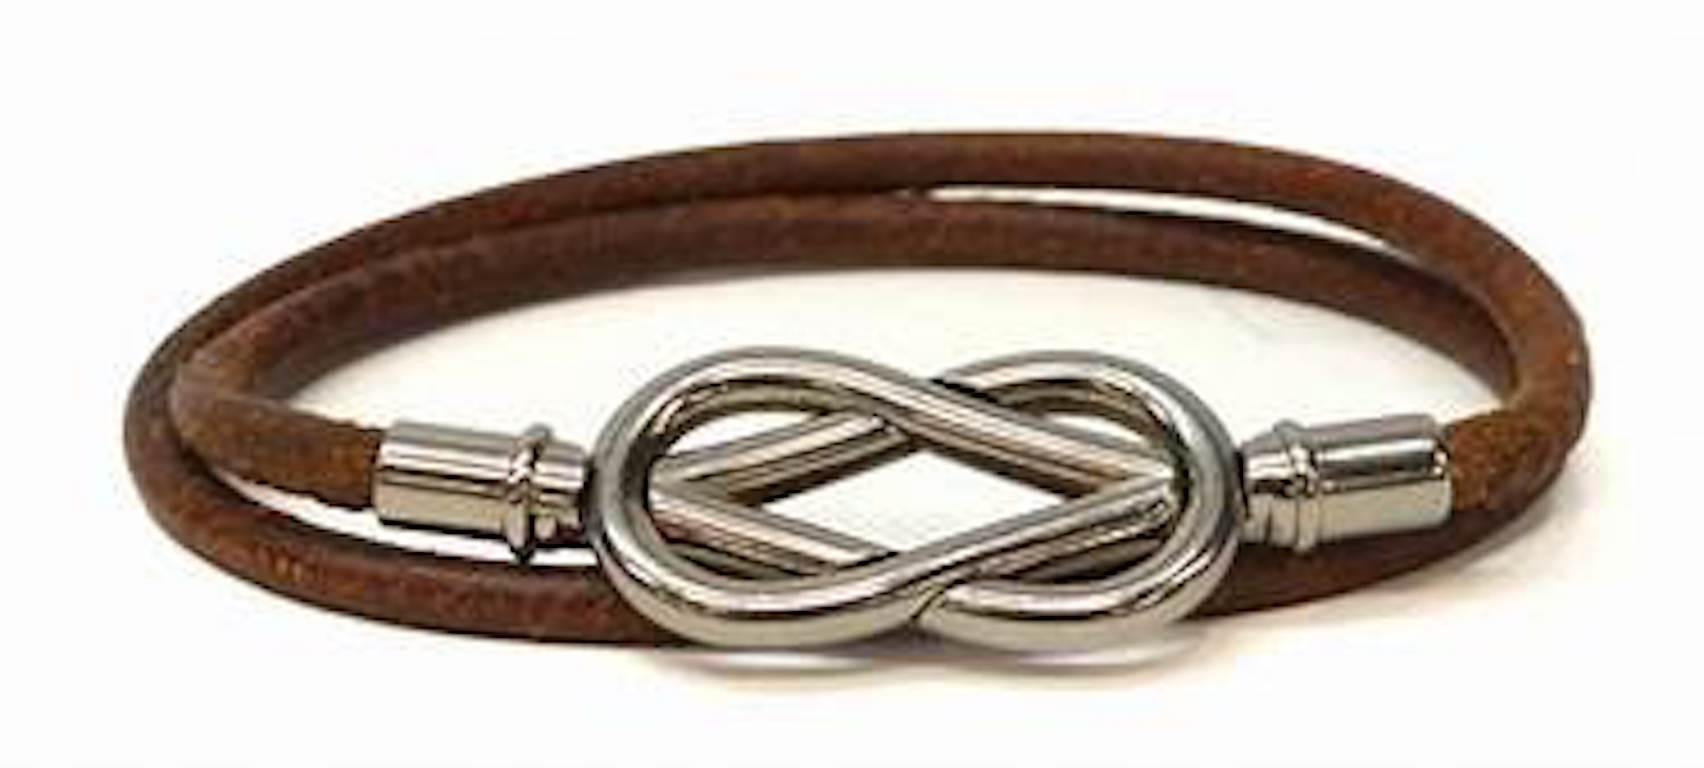 Hermes cognac color leather round cord with rhodium plate square knot clasp. Knot is 1.38 inches wide and .75 of an inch high not including the rhodium end pieces that hold the leather cord ends. With the rhodium end pieces the clasp is 2 inches